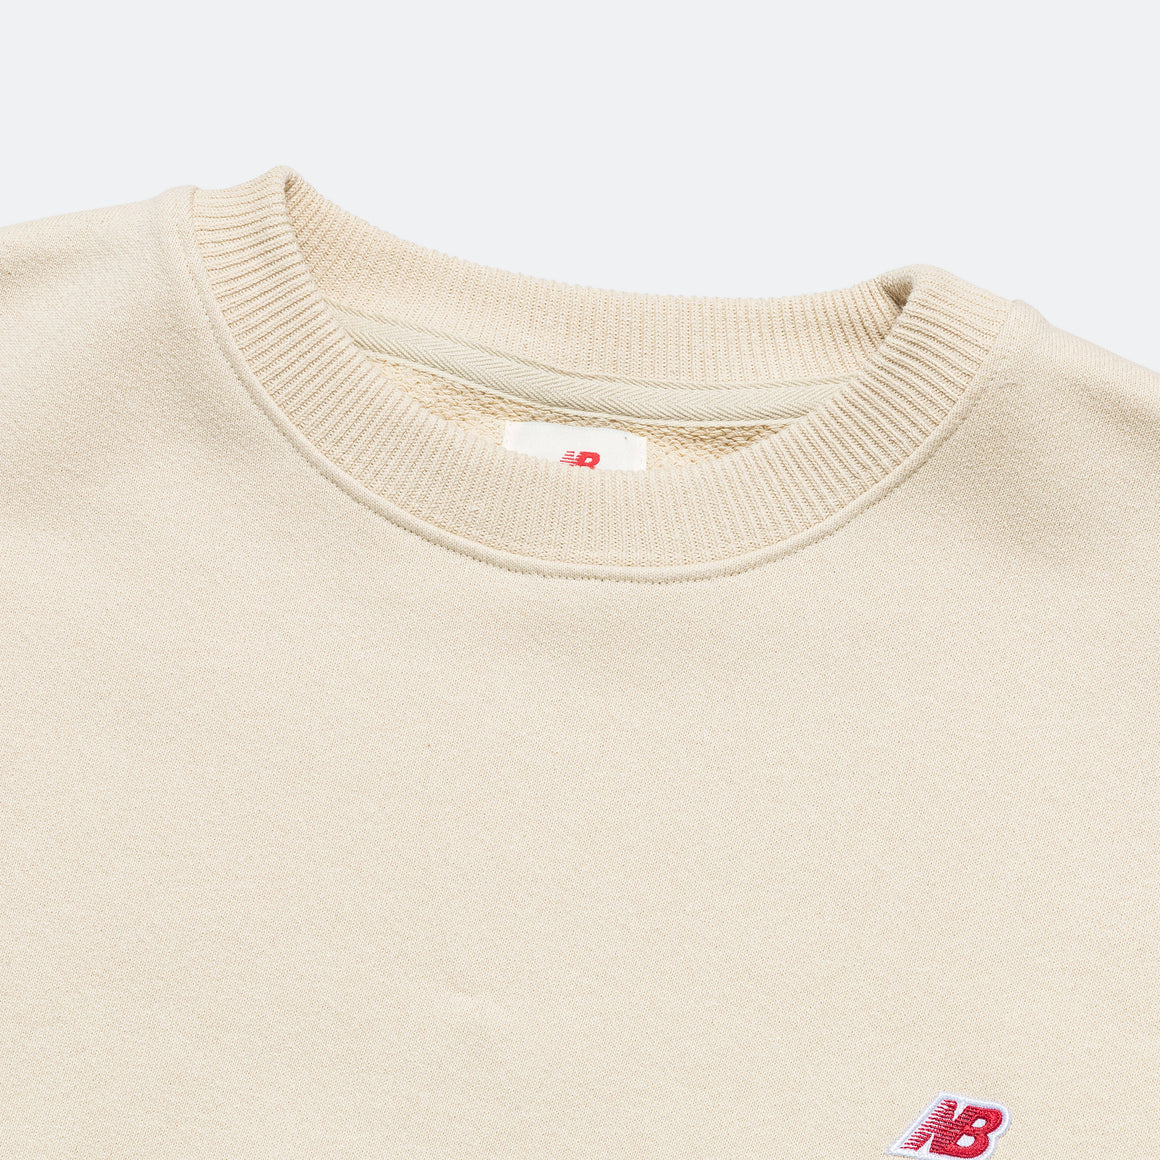 New Balance - MADE in USA Core Crewneck - Sandstone - UP THERE